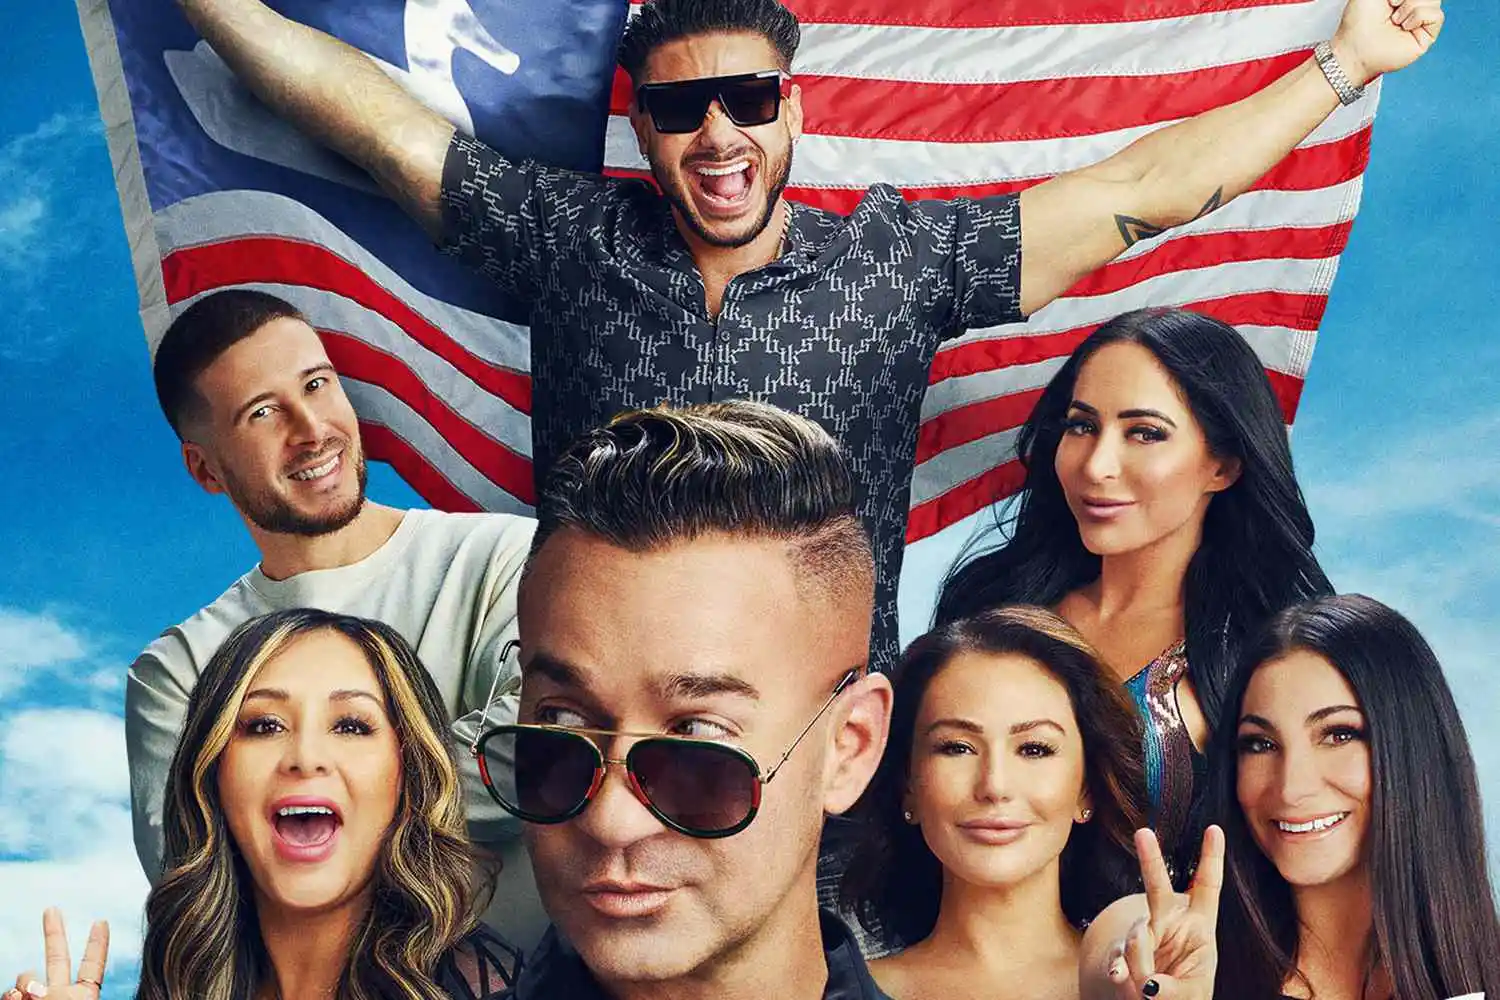 How Watch 'Jersey Shore: Family Vacation' Season 6 Online in UK